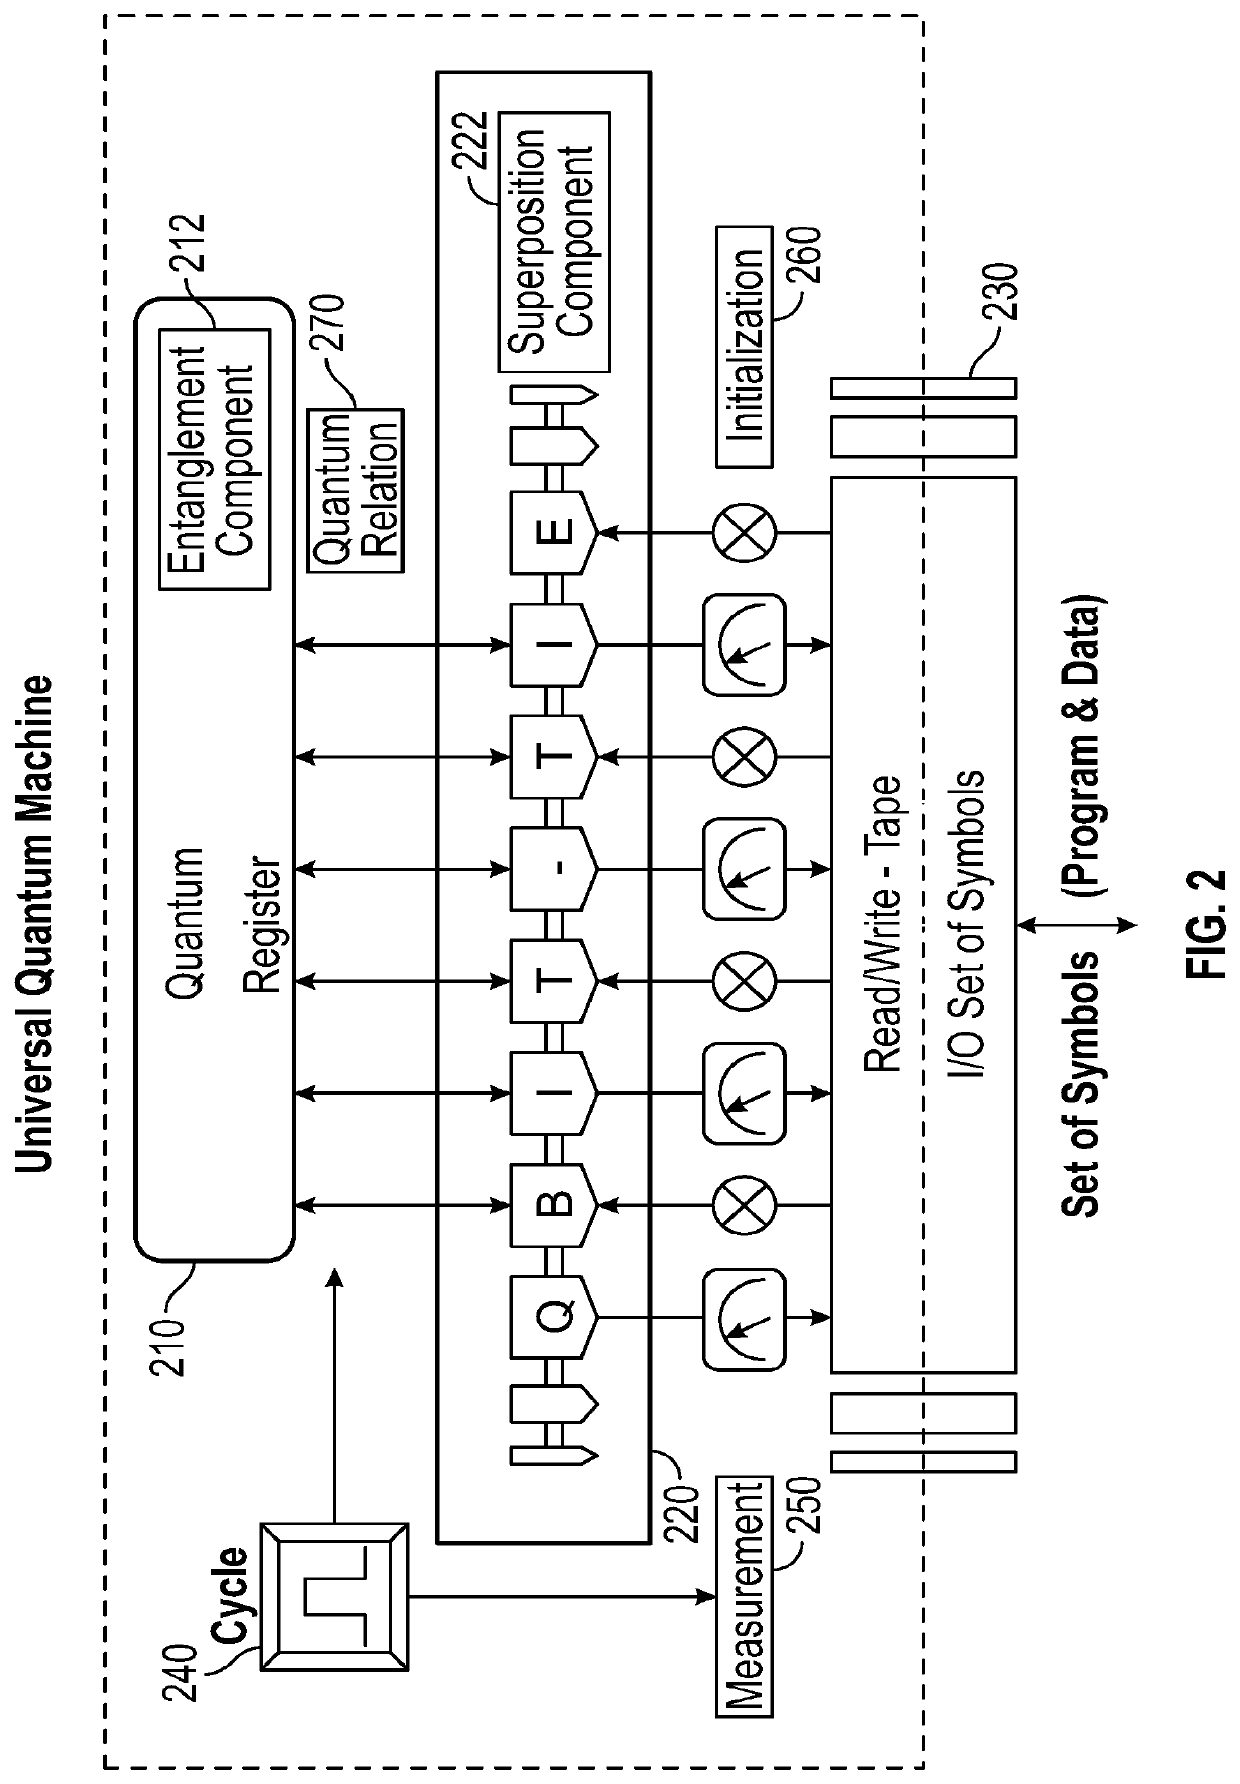 Systems and methods involving hybrid quantum machines, aspects of quantum information technology and/or other features